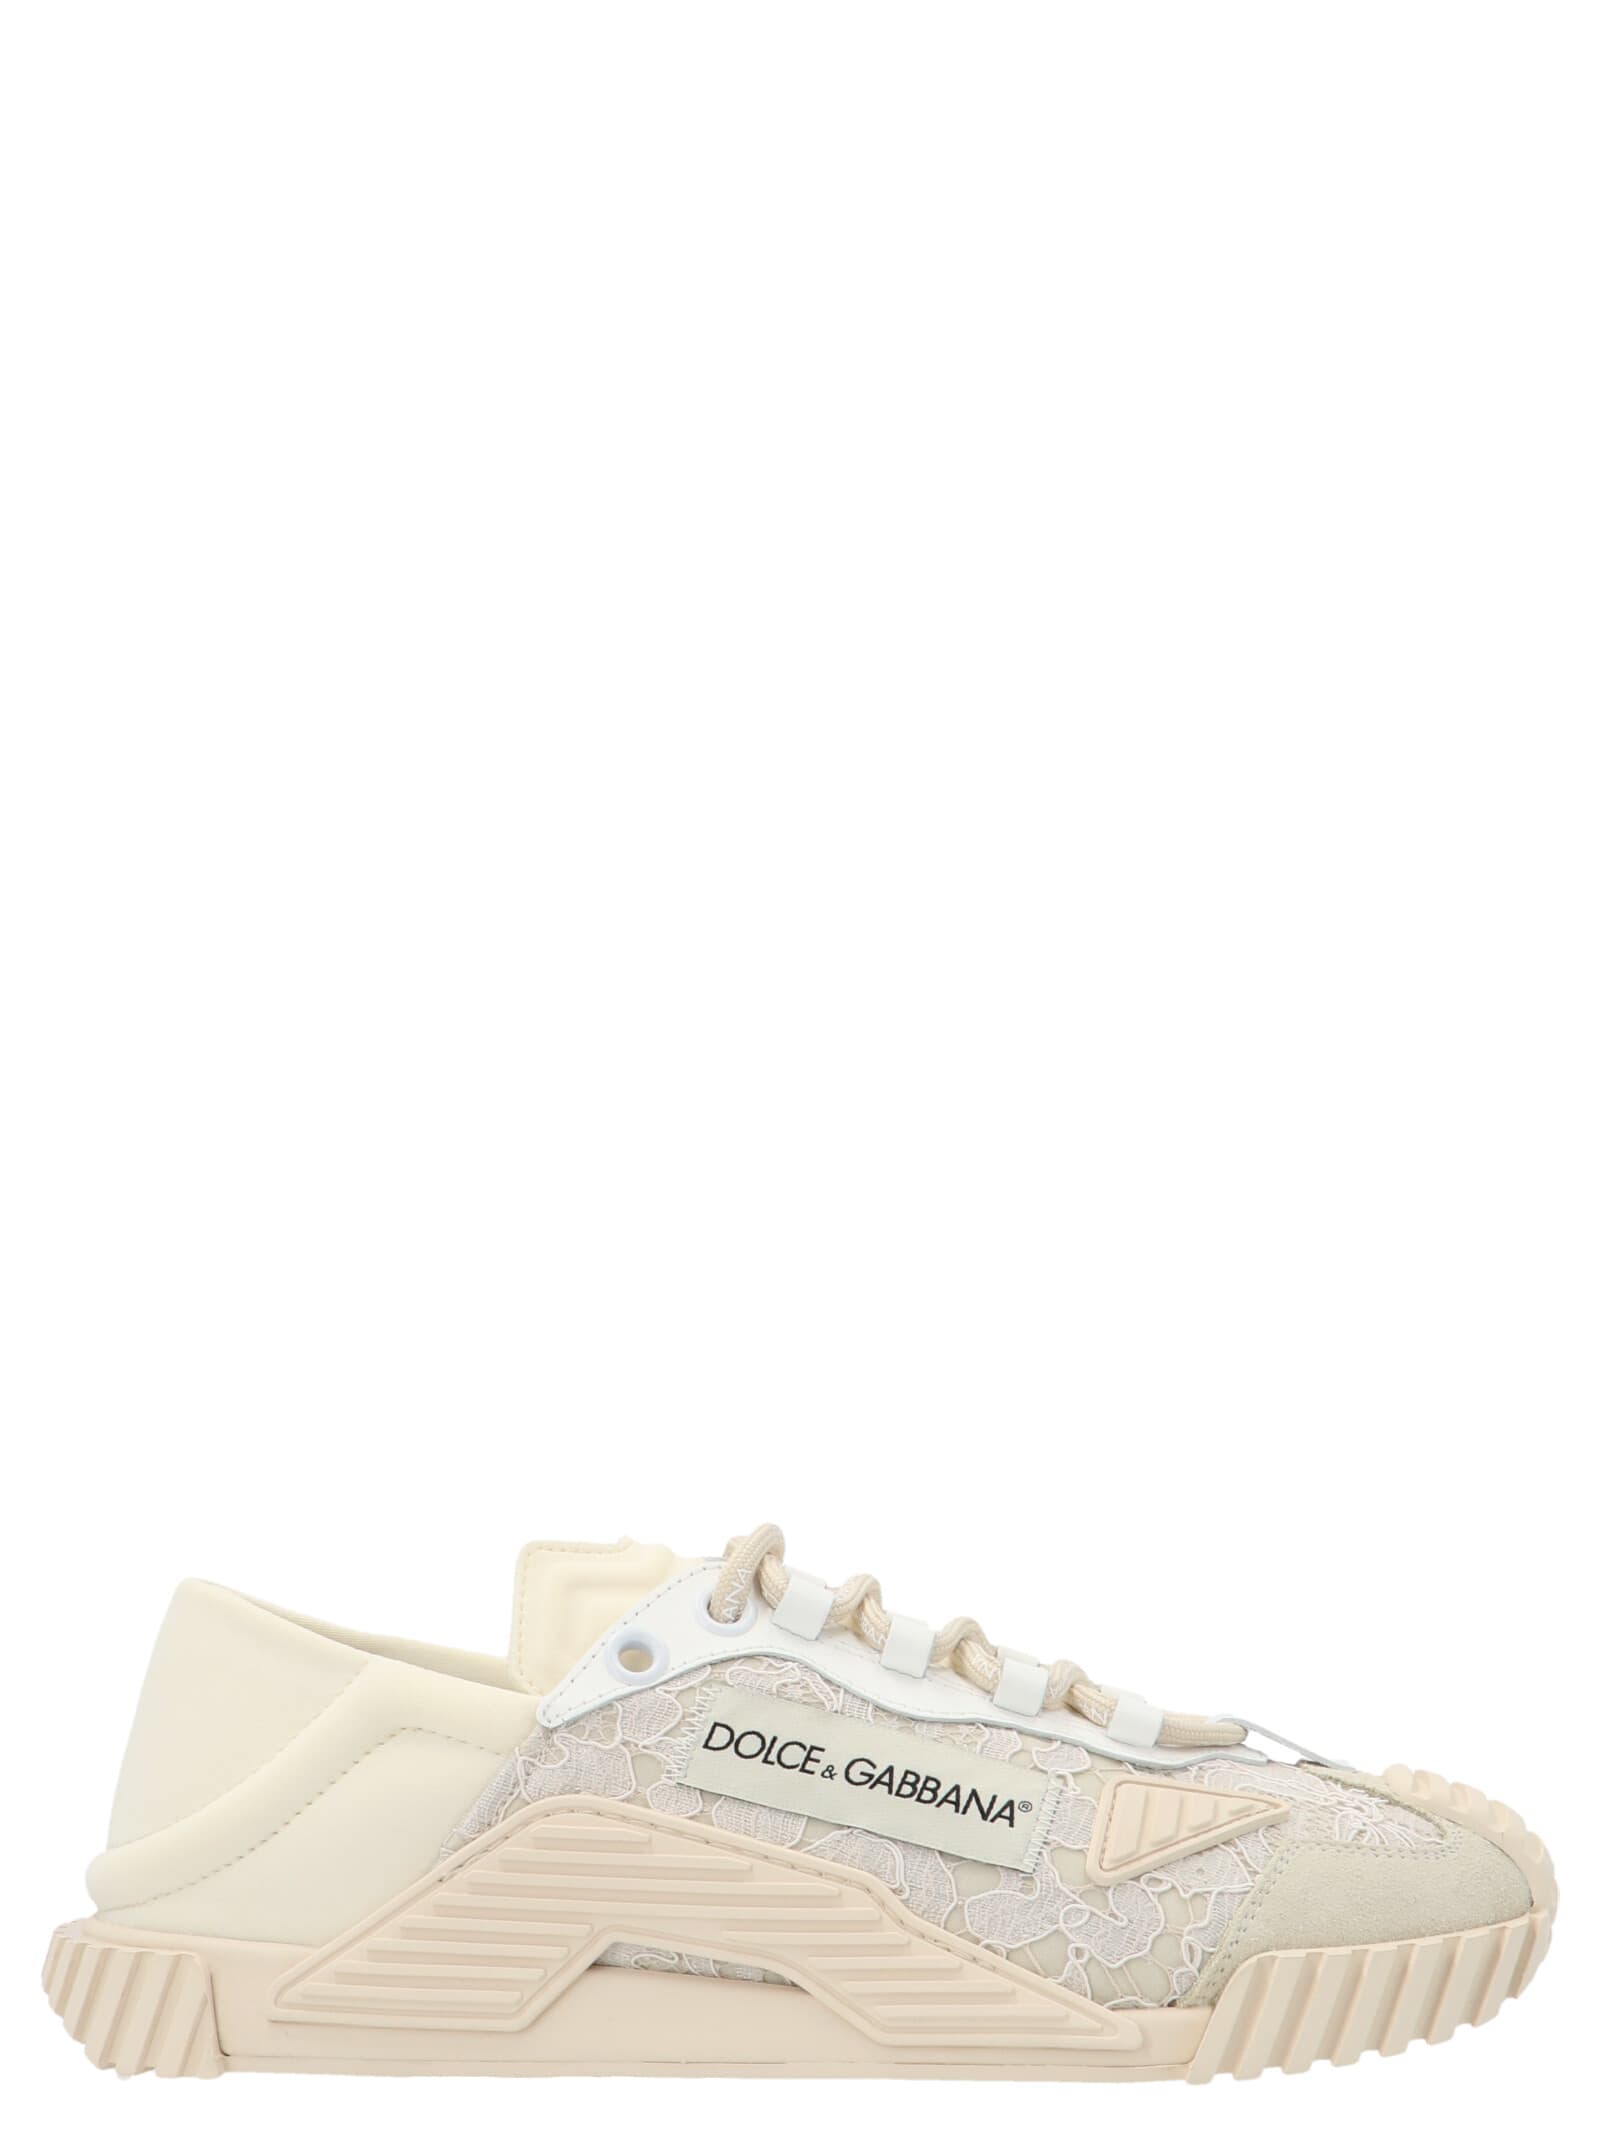 Dolce & Gabbana Lace Sneakers